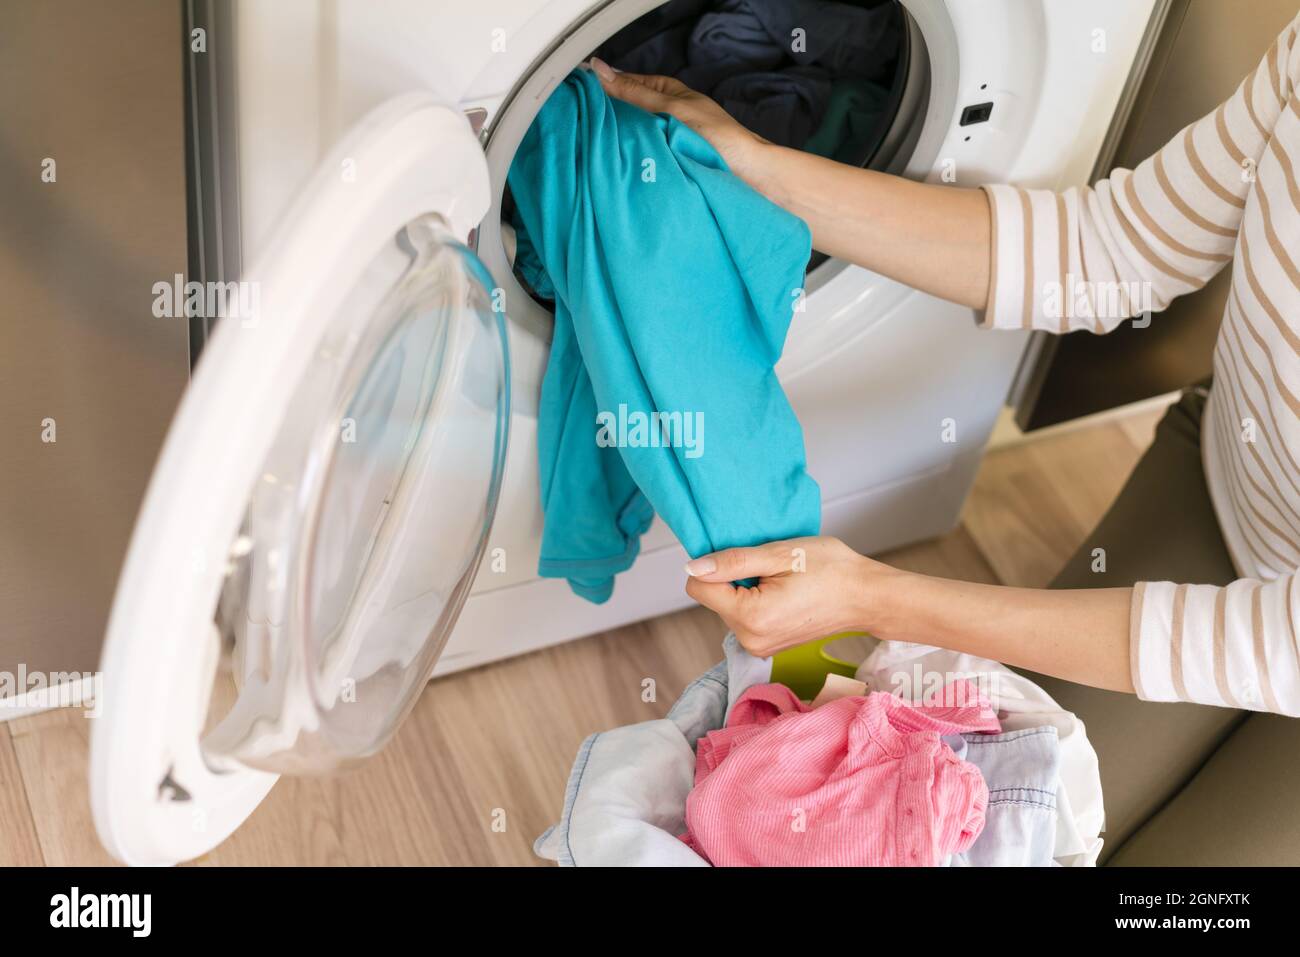 https://c8.alamy.com/comp/2GNFXTK/hands-taking-laundry-out-washing-machine-high-quality-and-resolution-beautiful-photo-concept-2GNFXTK.jpg